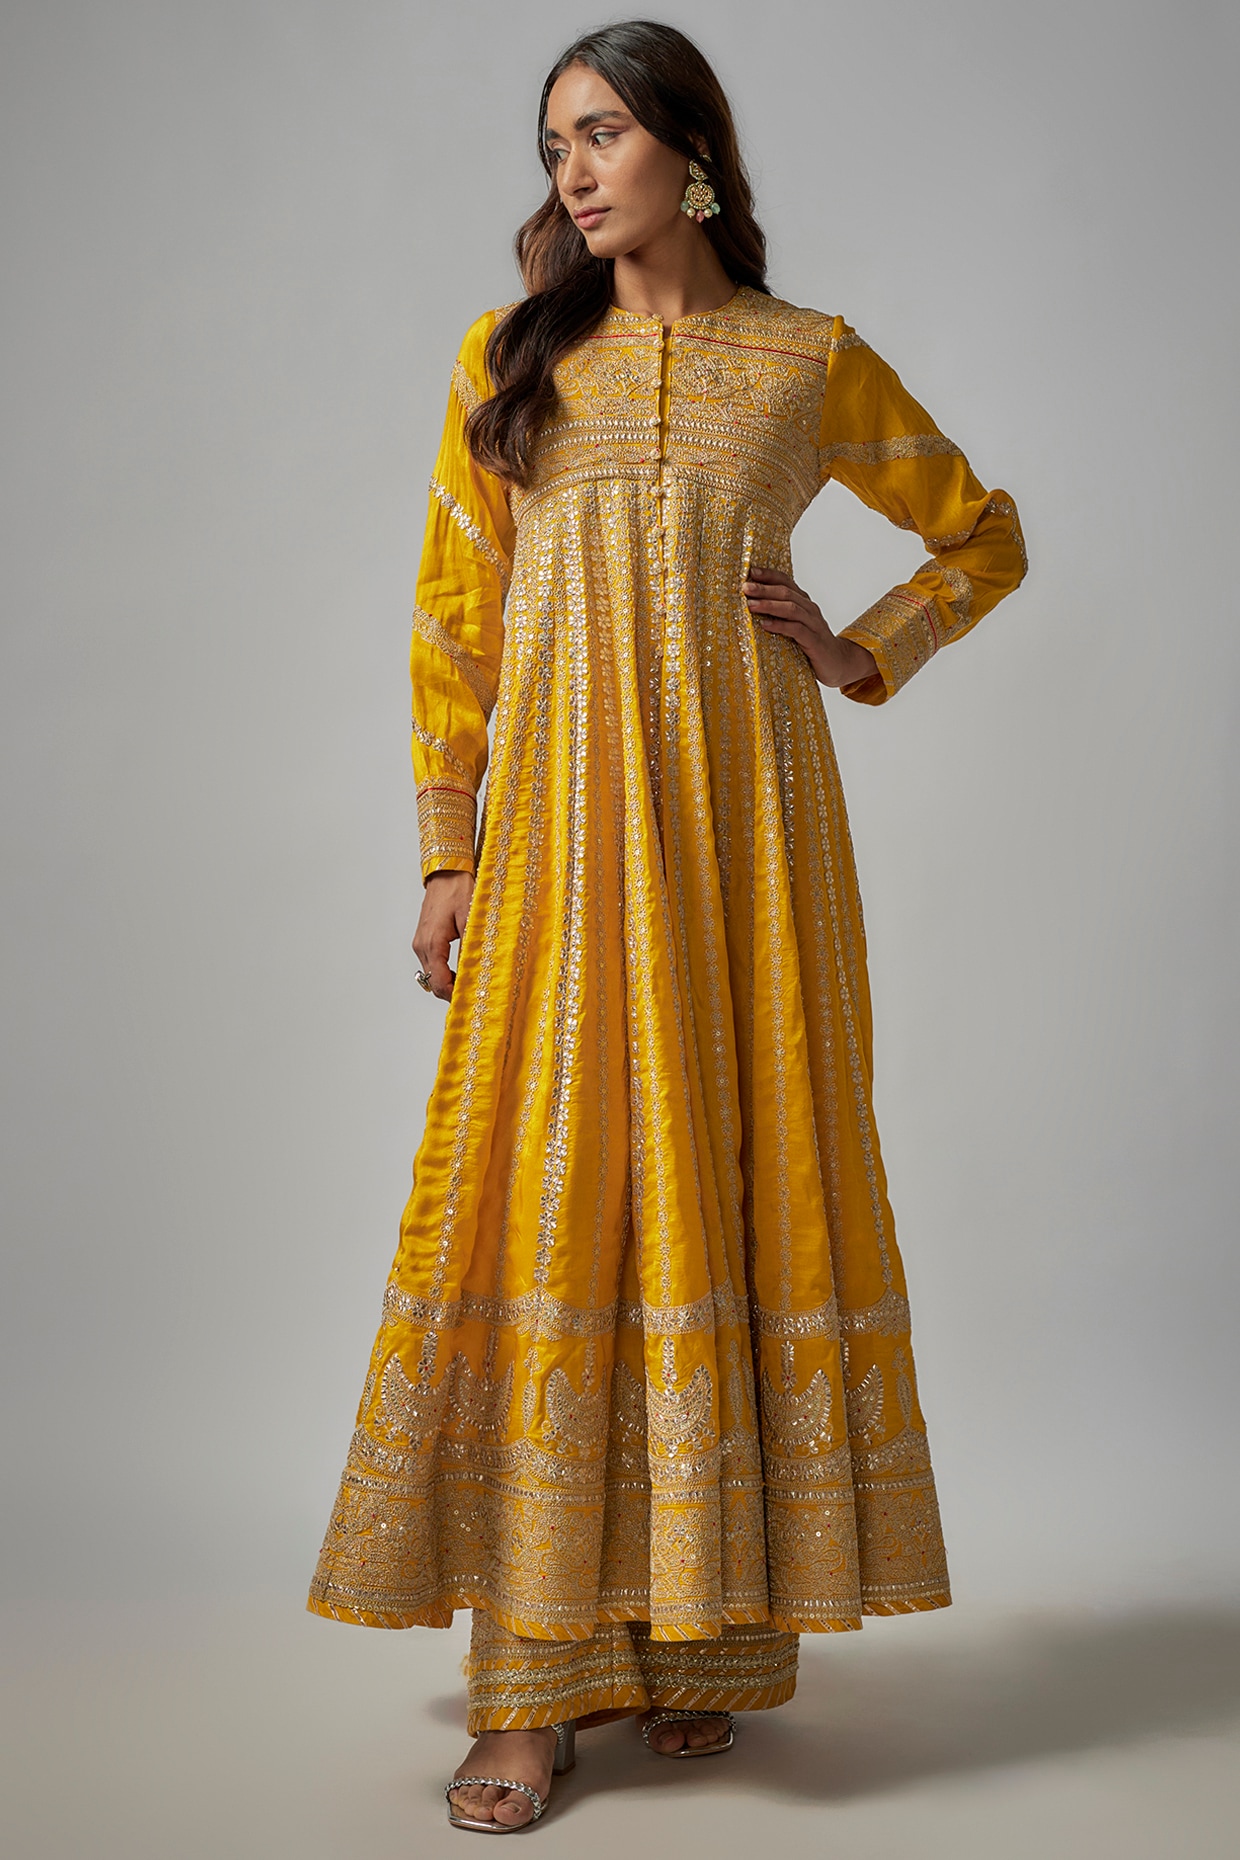 Dress for Girls - Shop Indian Girls Dresses Online at Mirraw